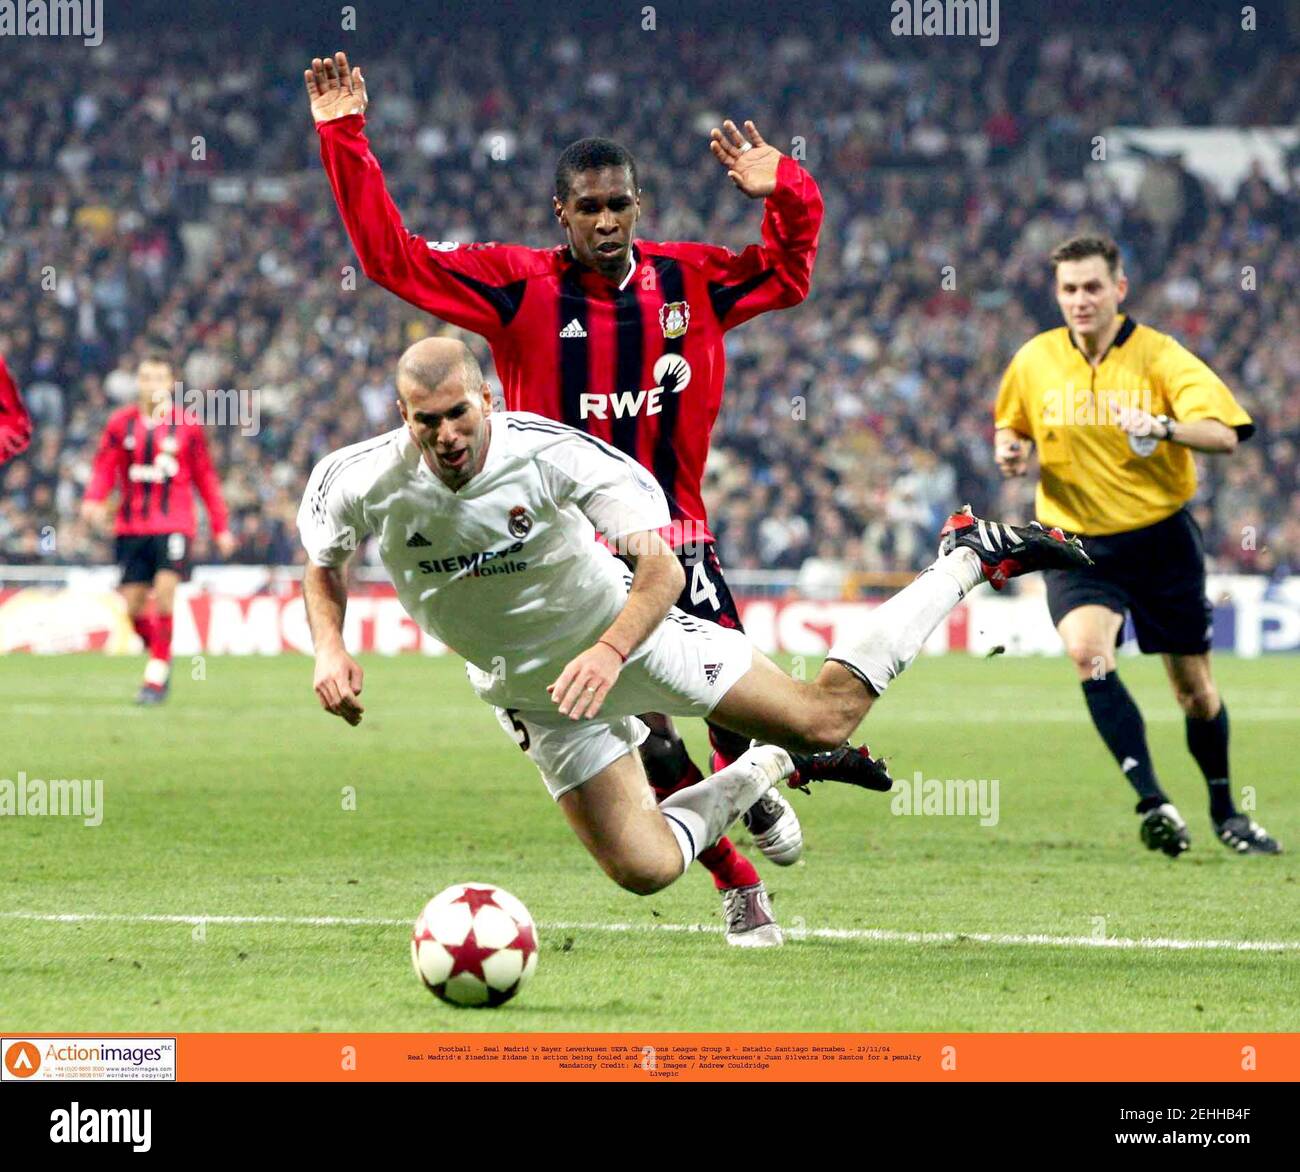 Football - Real Madrid v Bayer Leverkusen UEFA Champions League Group B -  Estadio Santiago Bernabeu - 23/11/04 Real Madrid's Zinedine Zidane in  action being fouled and brought down by Leverkusen's Juan